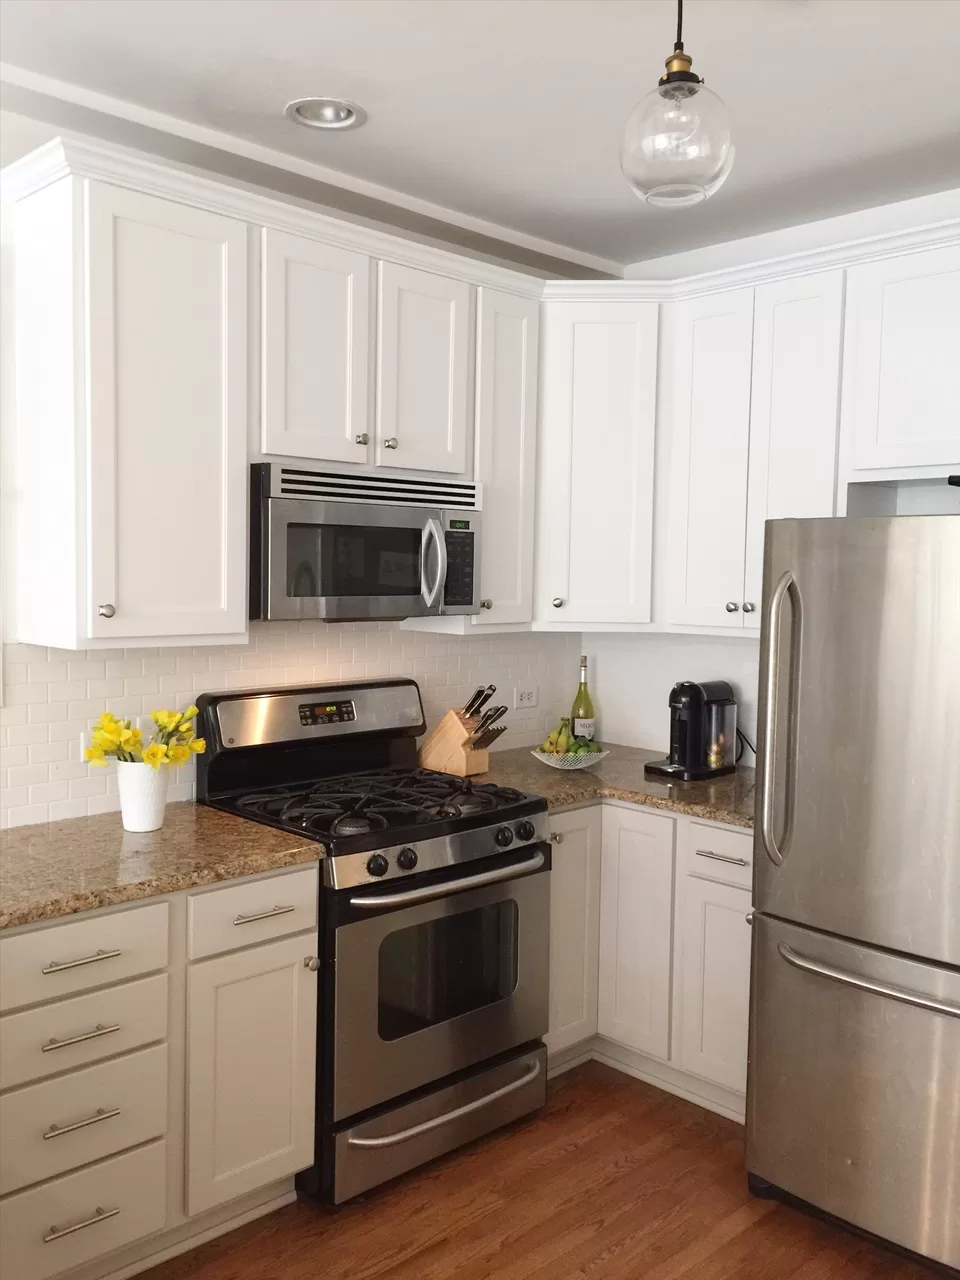 Kitchen Cabinet Refacing Review- Why We Chose It for Our Home